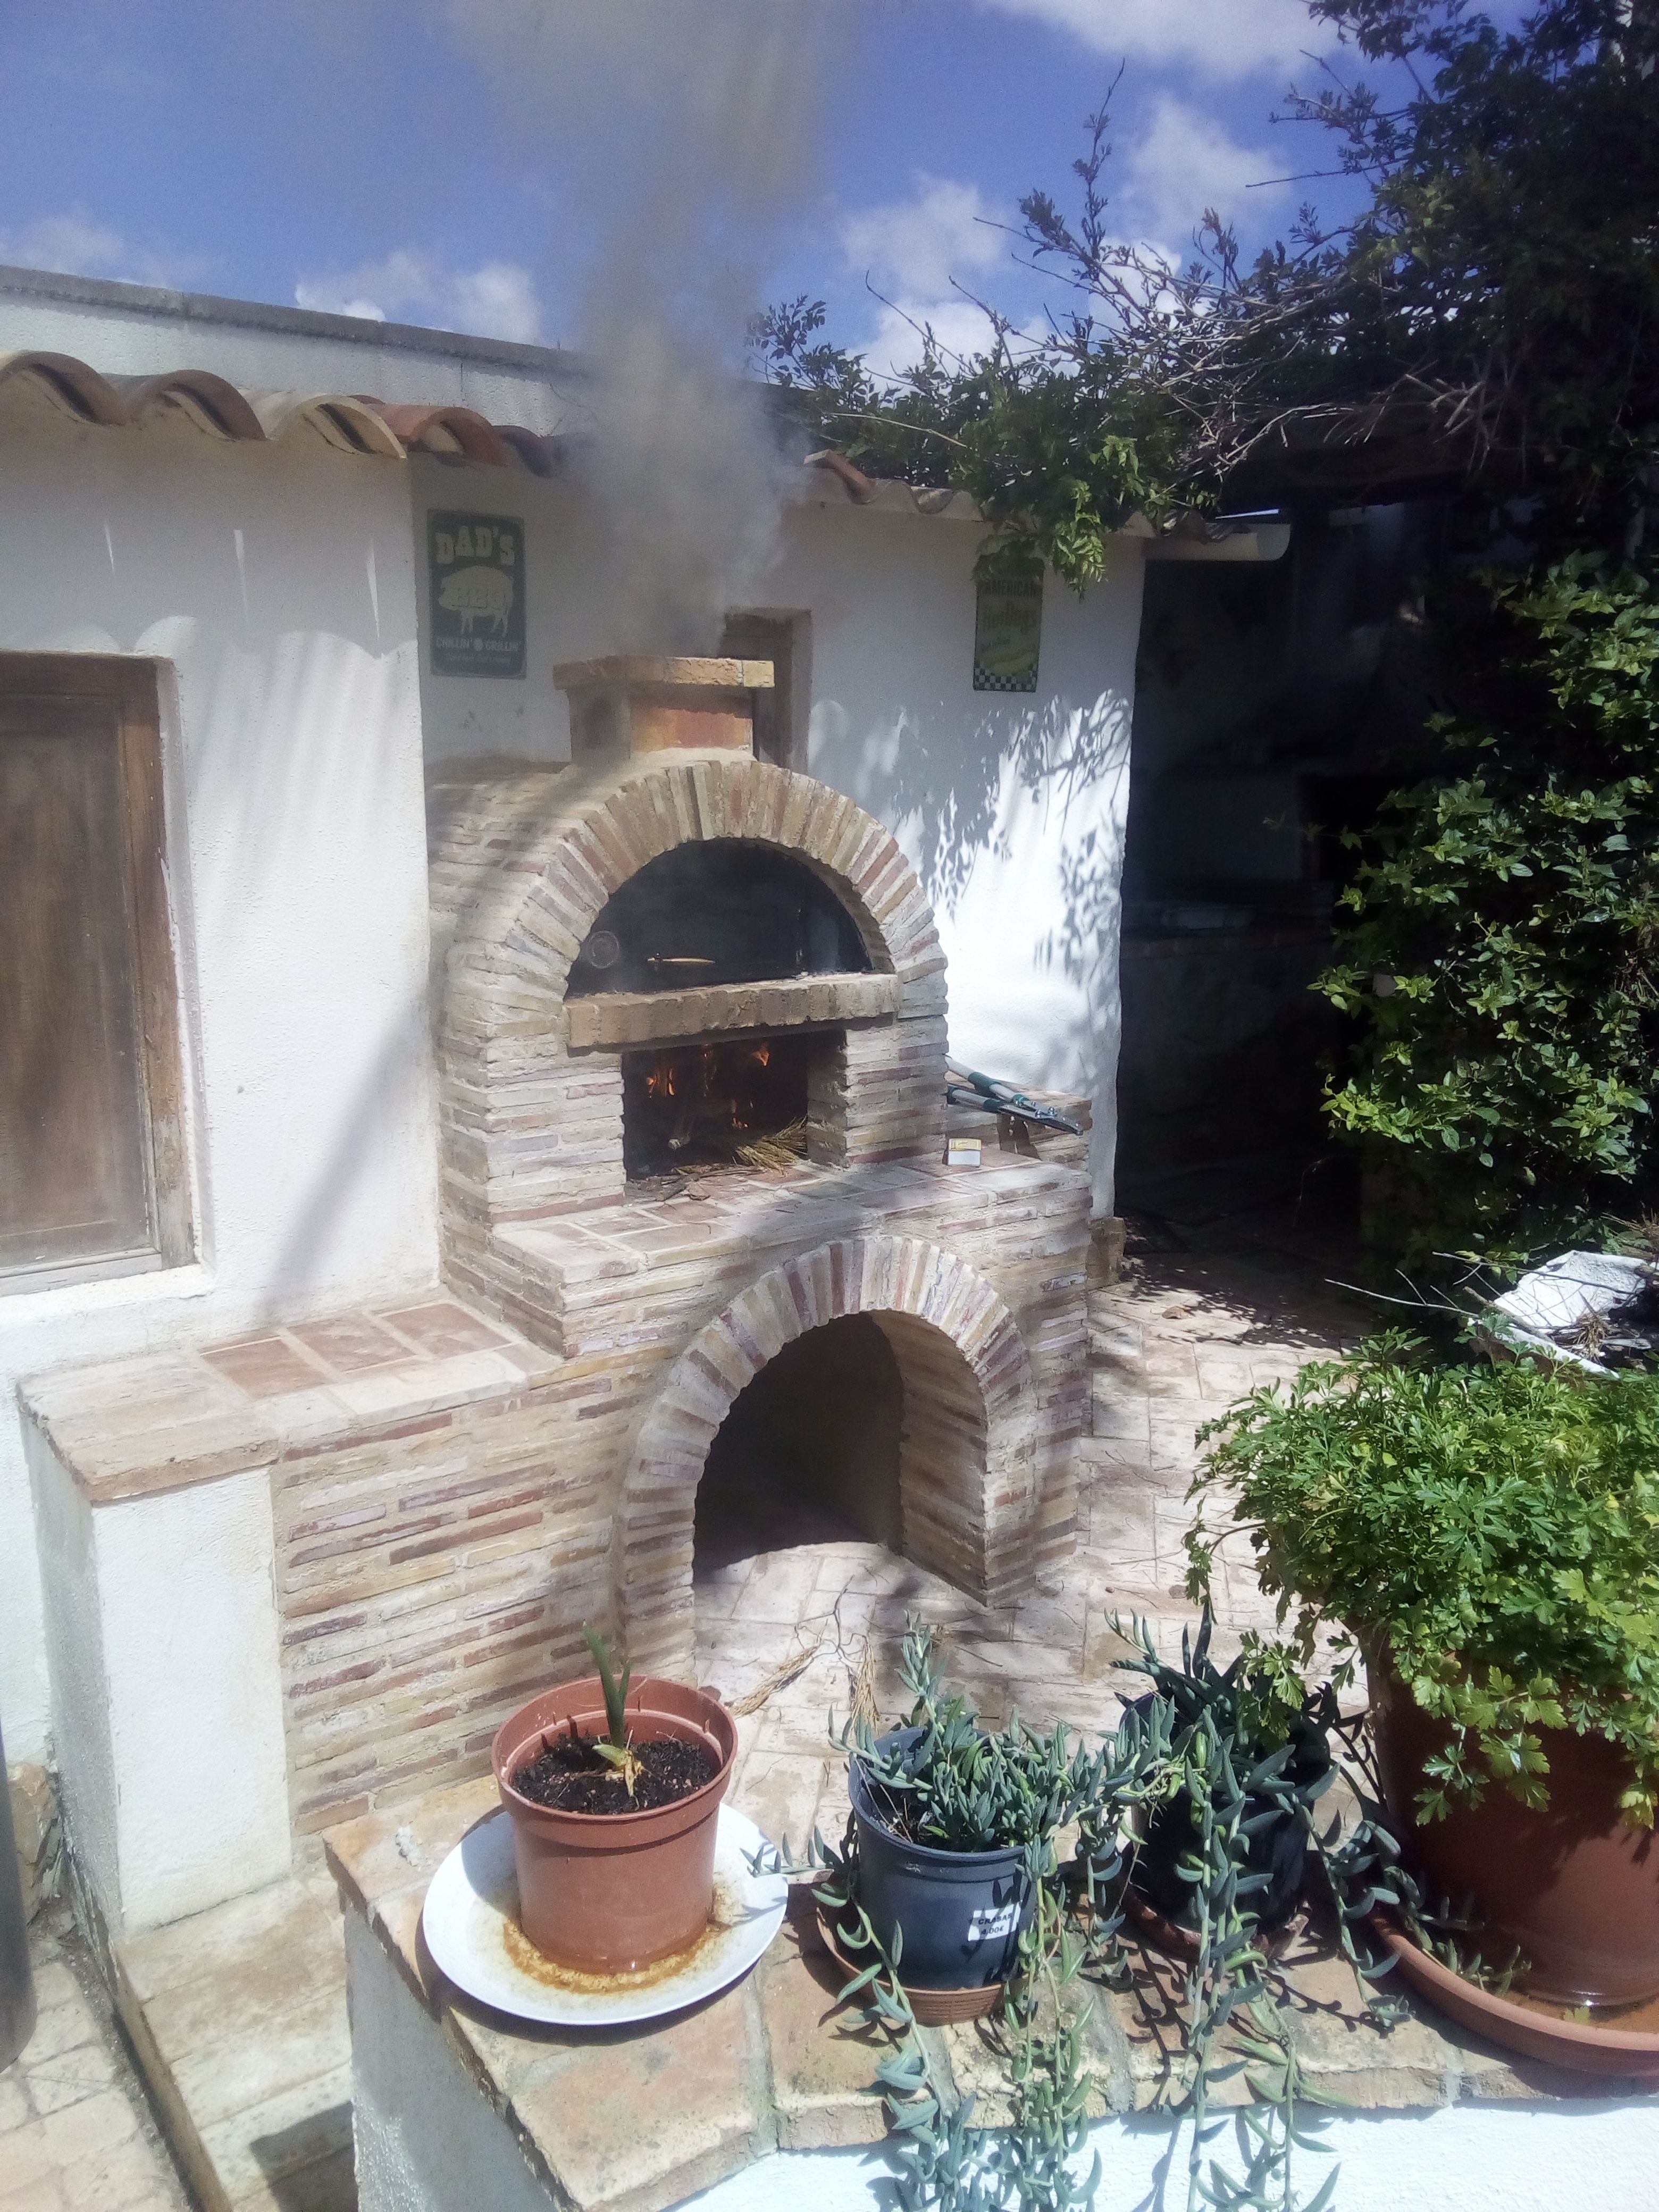 The Features of the Best Wood Fired Pizza Ovens